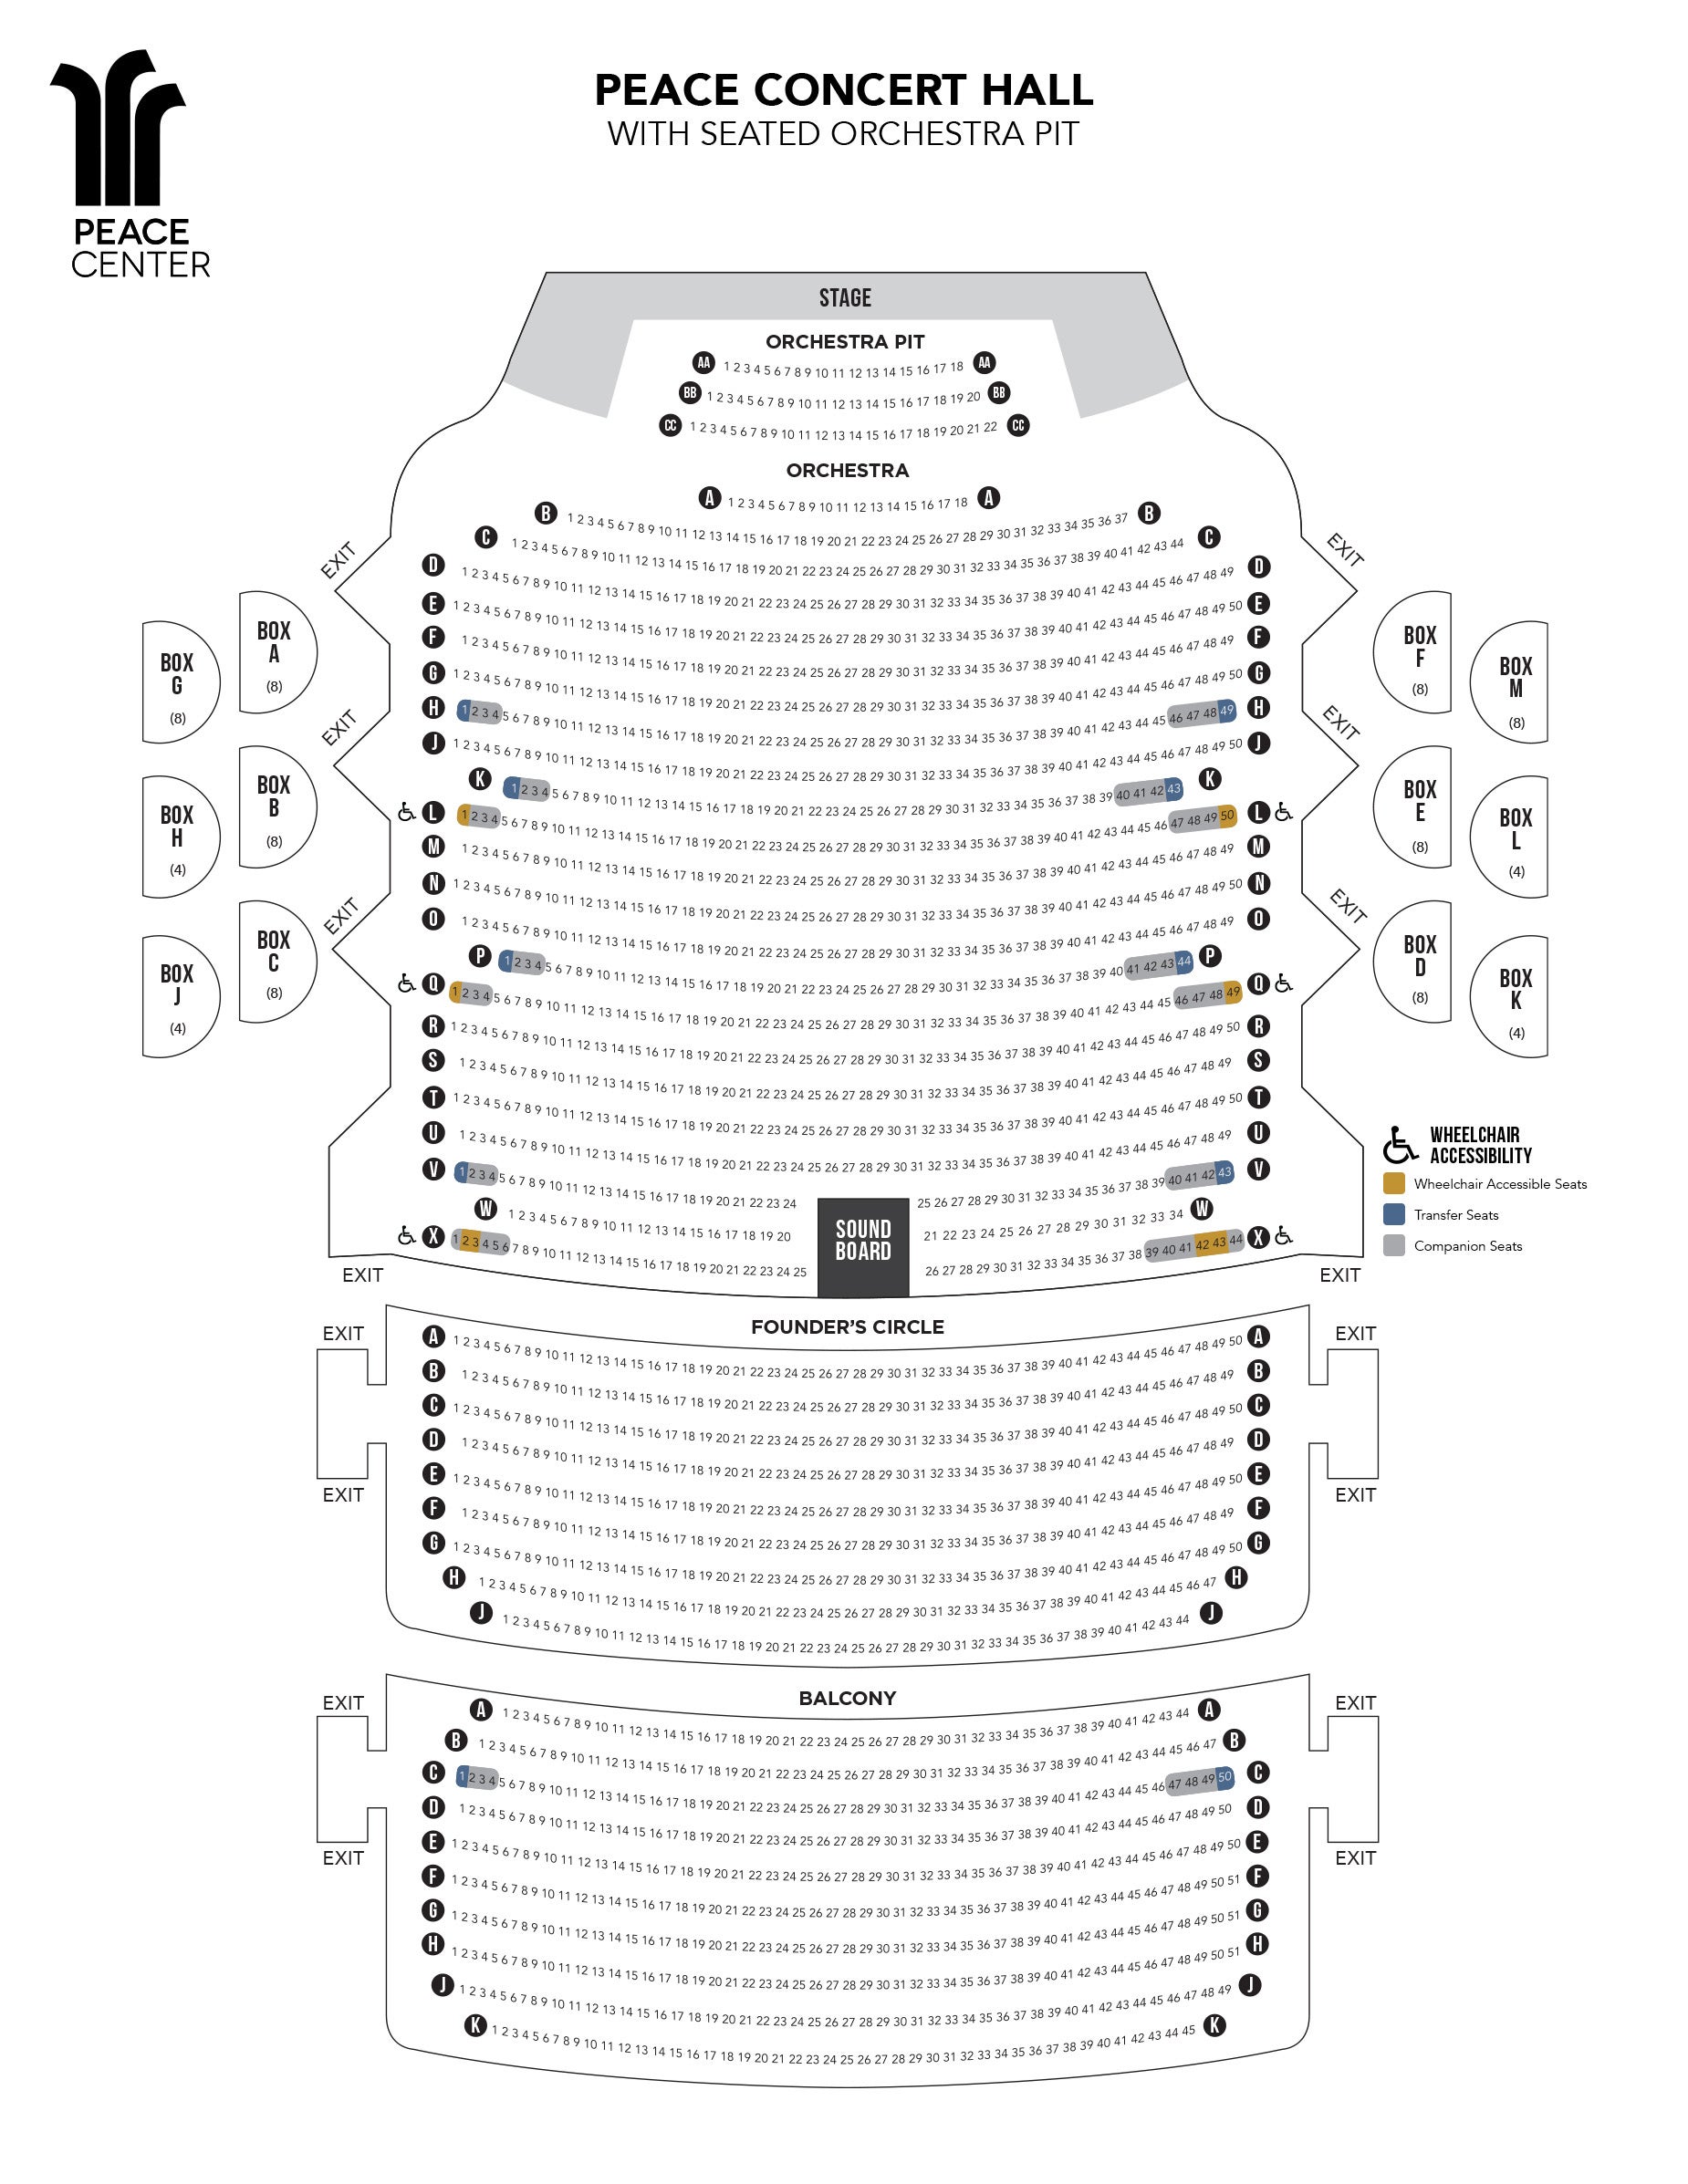 Seating Charts | Peace Center - Official Site